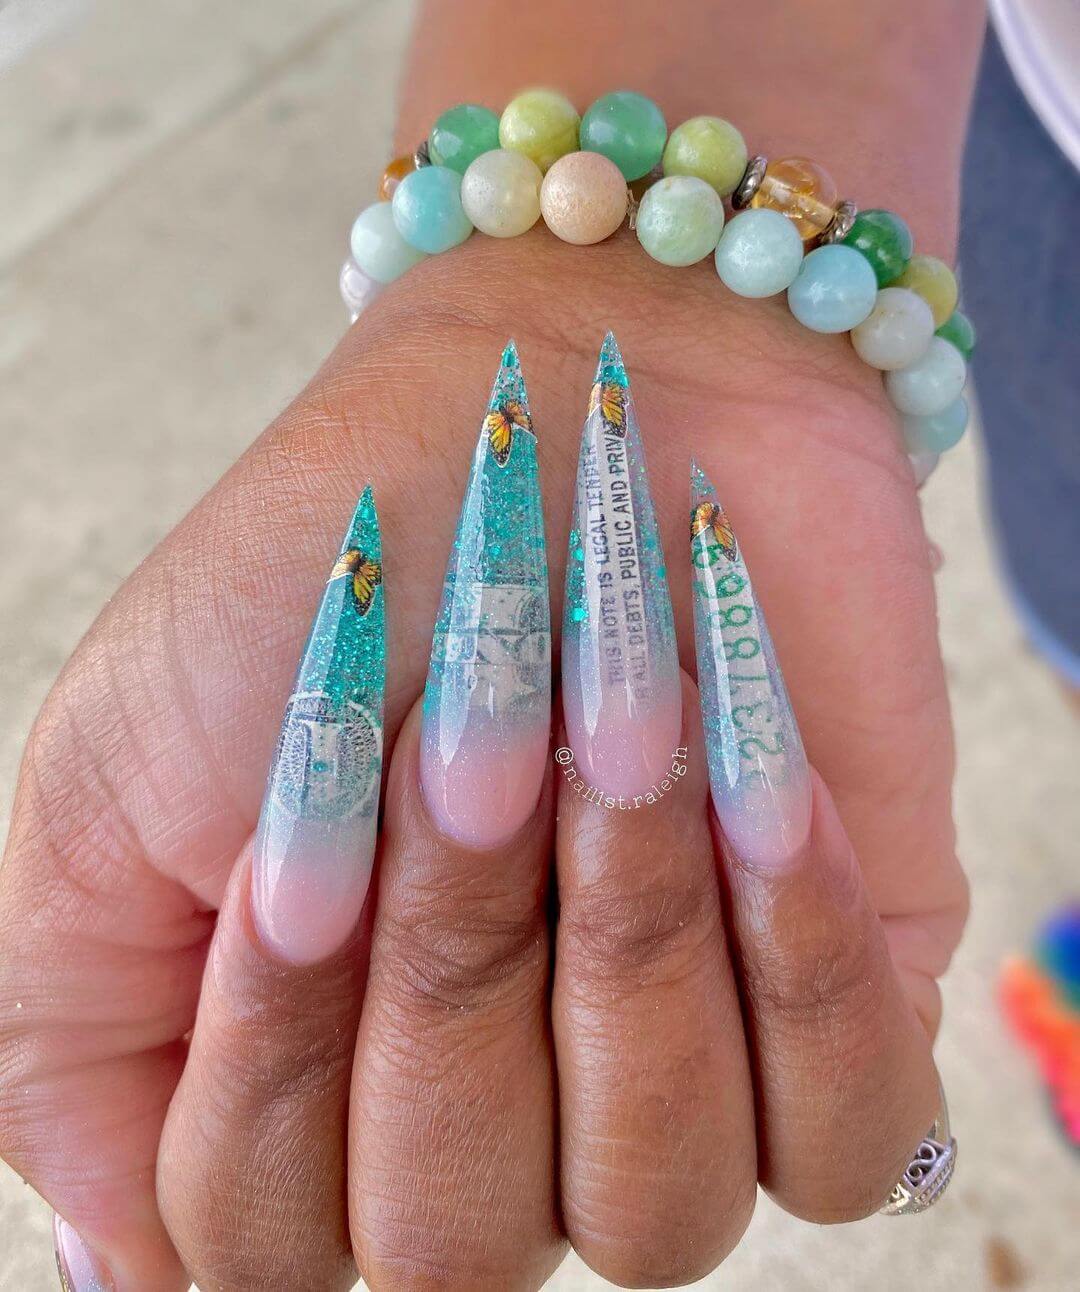 Dollar nail art design in pink and blue